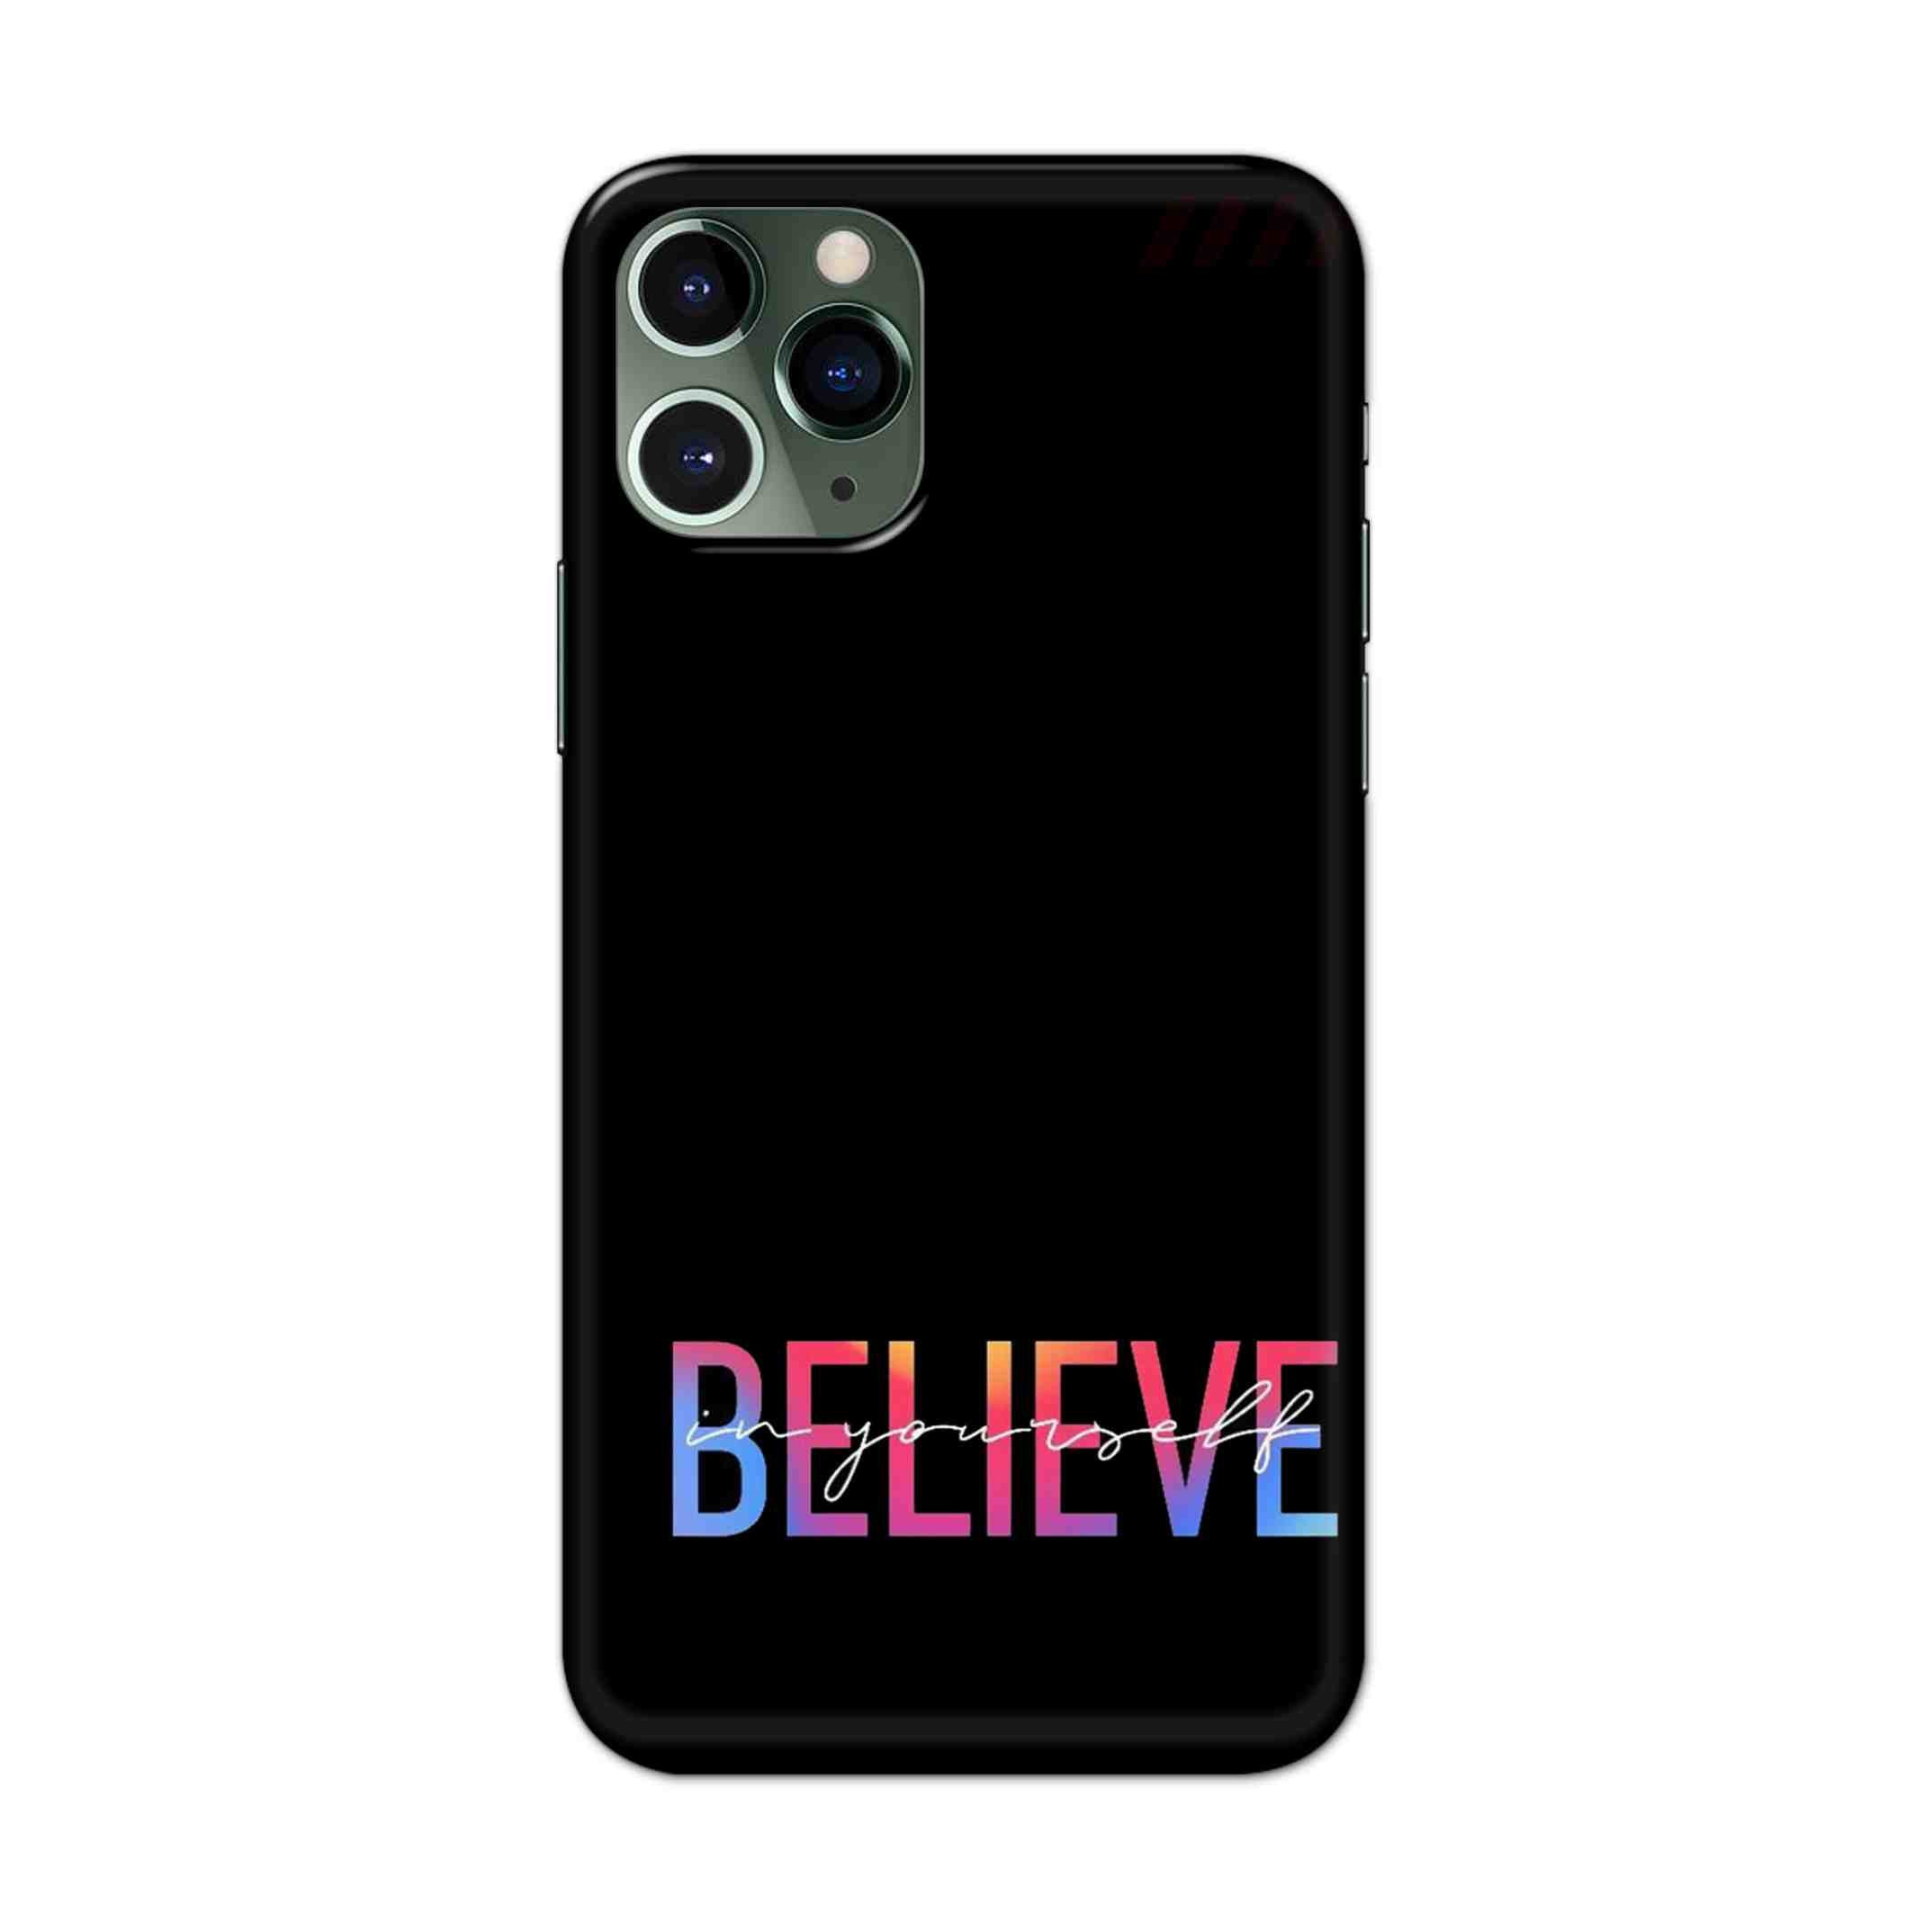 Buy Believe Hard Back Mobile Phone Case/Cover For iPhone 11 Pro Online